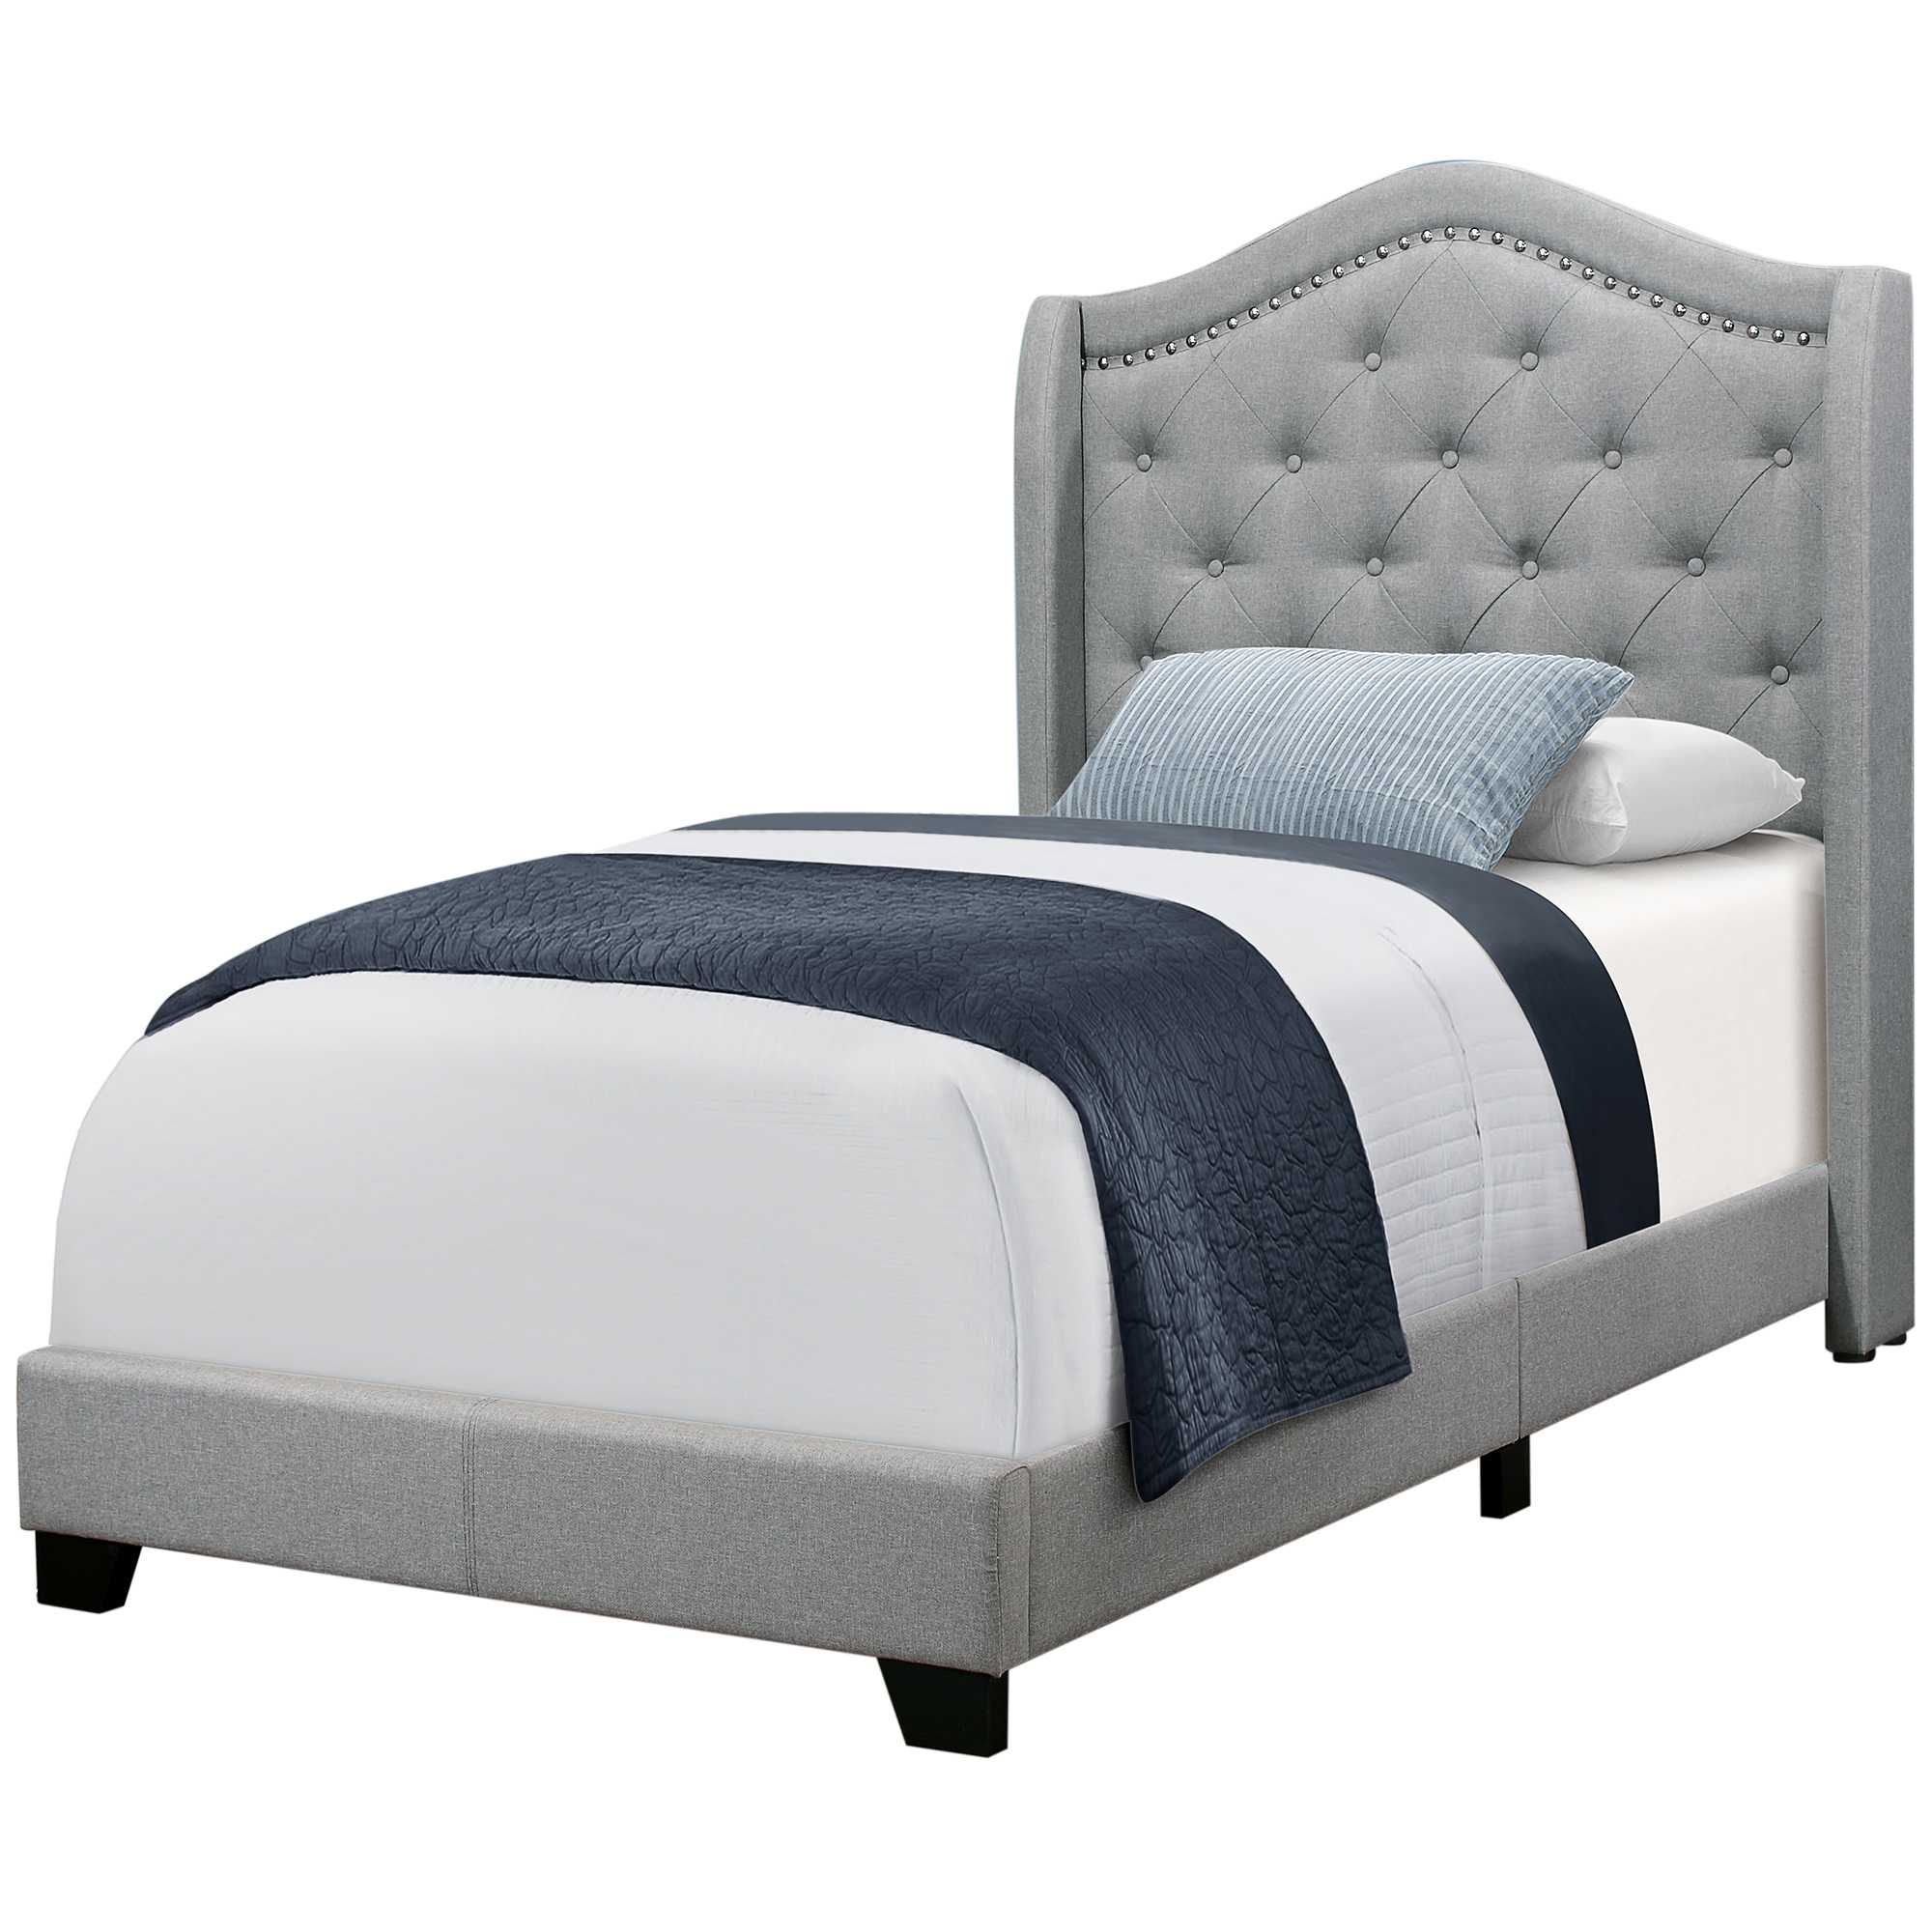 45.75" x 82.75" x 56.5" Grey Foam Solid Wood Linen Twin Size Bed With A Chrome Trim